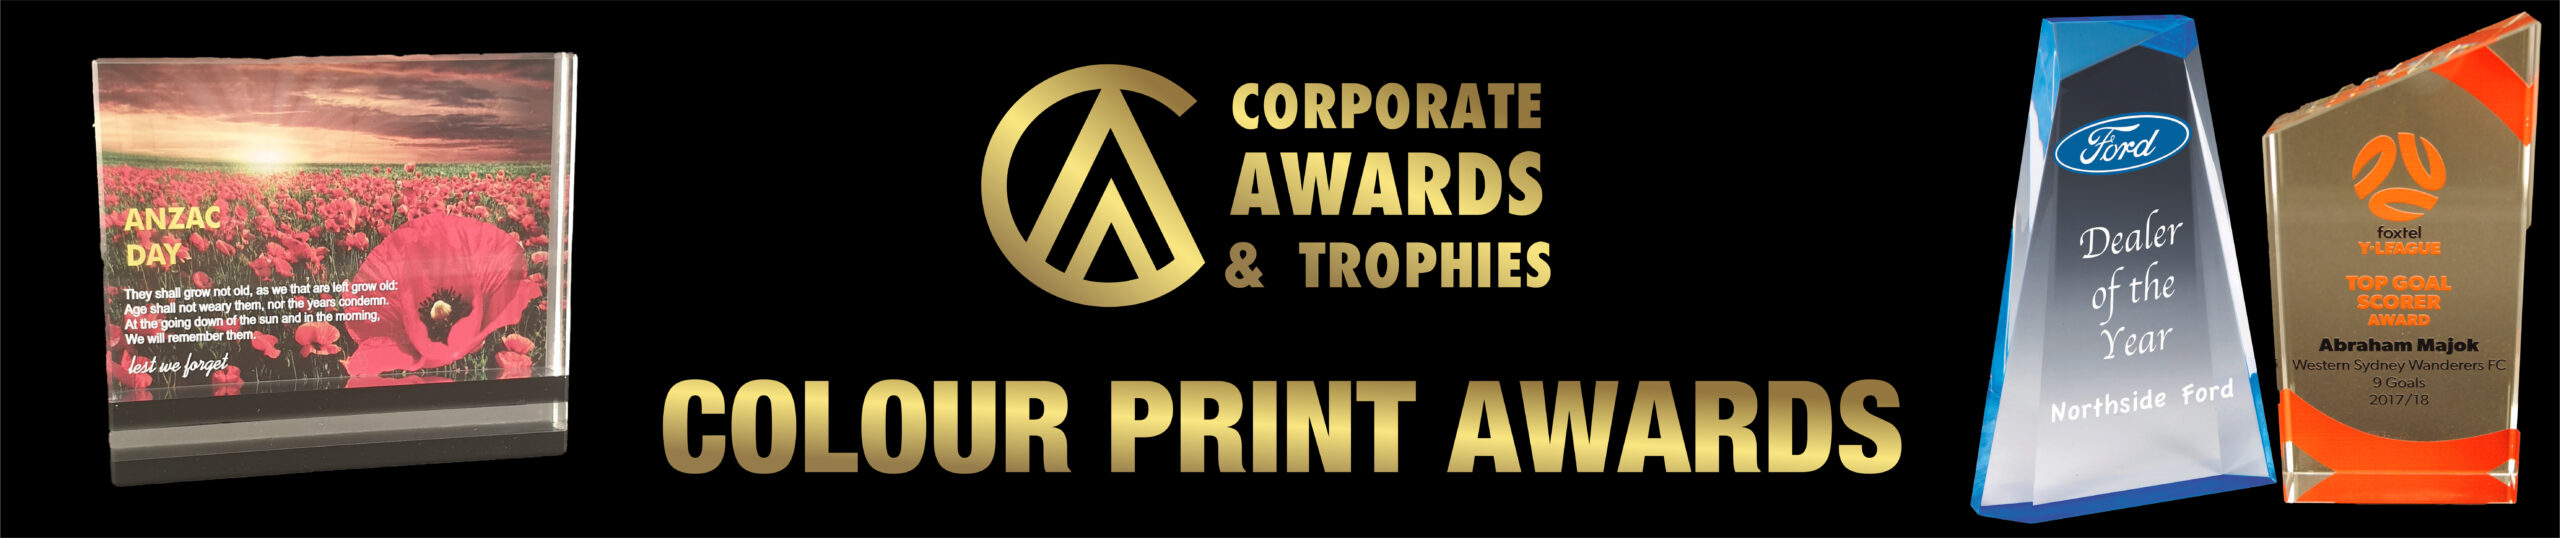 Awards with Colour Print